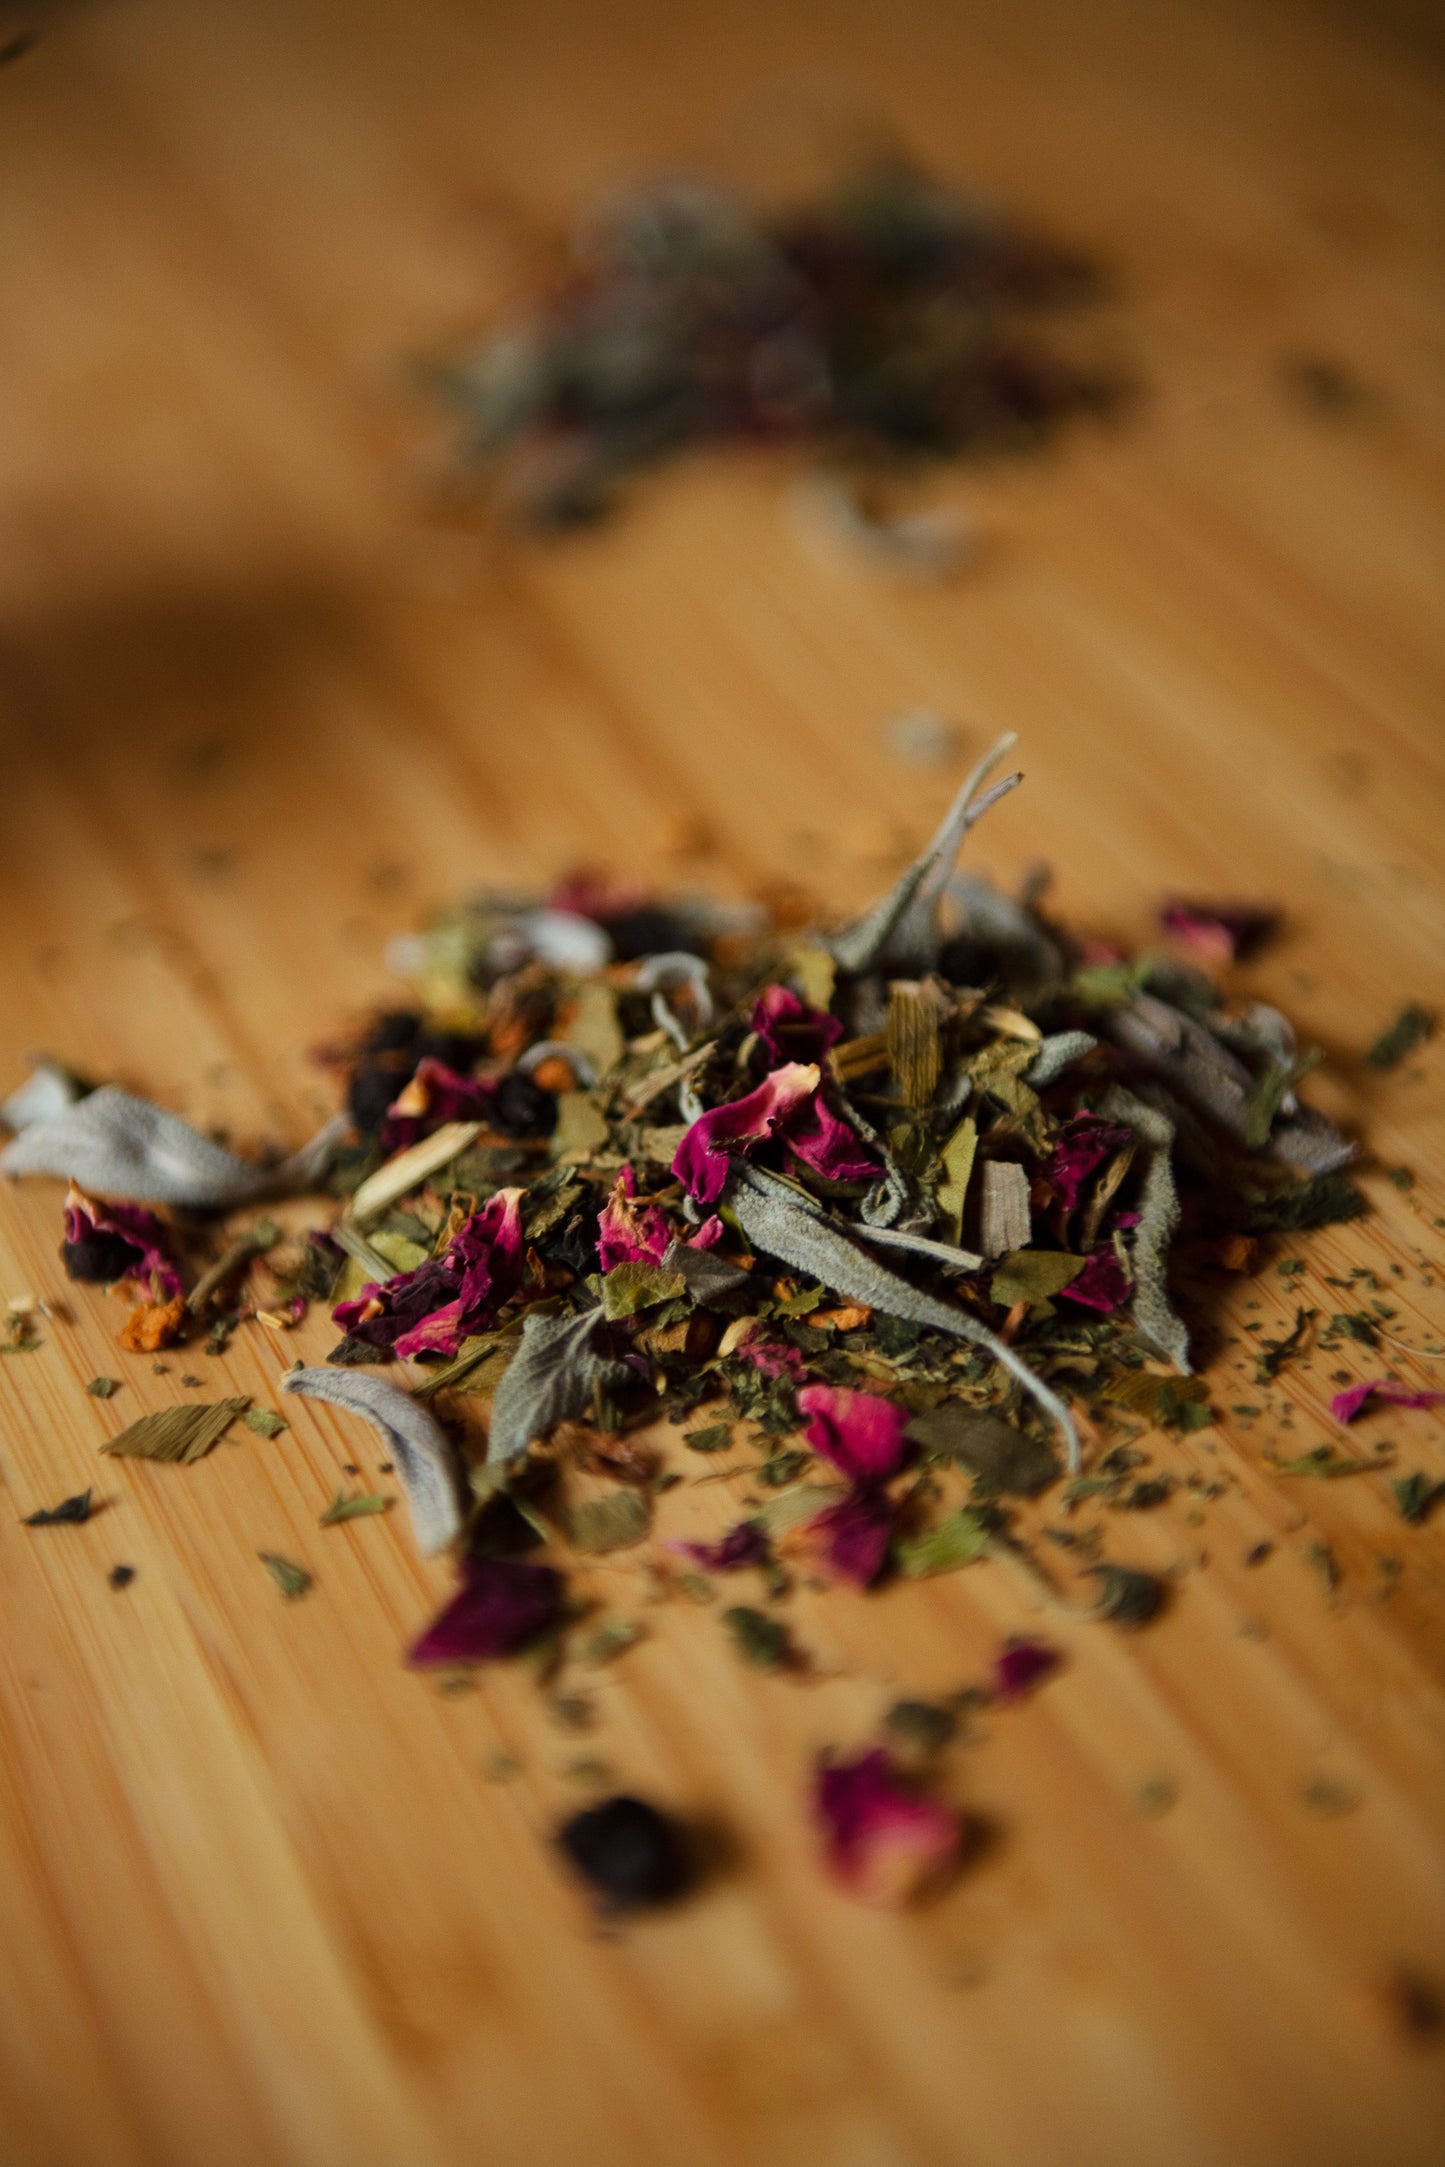 bespoke herbal tea, infusion, tissane, small batch, bespoke, artisan, dried herbs, herbal medicine, made to order, tailor made, organic, menopause, pregnancy, lactation, mum and bub, breastfeeding, detox and cleanse, blood cleansing, alterative, liver support, detoxification, kidney health, digest, digestion, rest, relax, calm, sleep, sedative, hypnotic, insomnia, hot flushes, hot flashes, menopausal sweats, night sweats, nervous system support. rewd rose petals. loose leaf tea